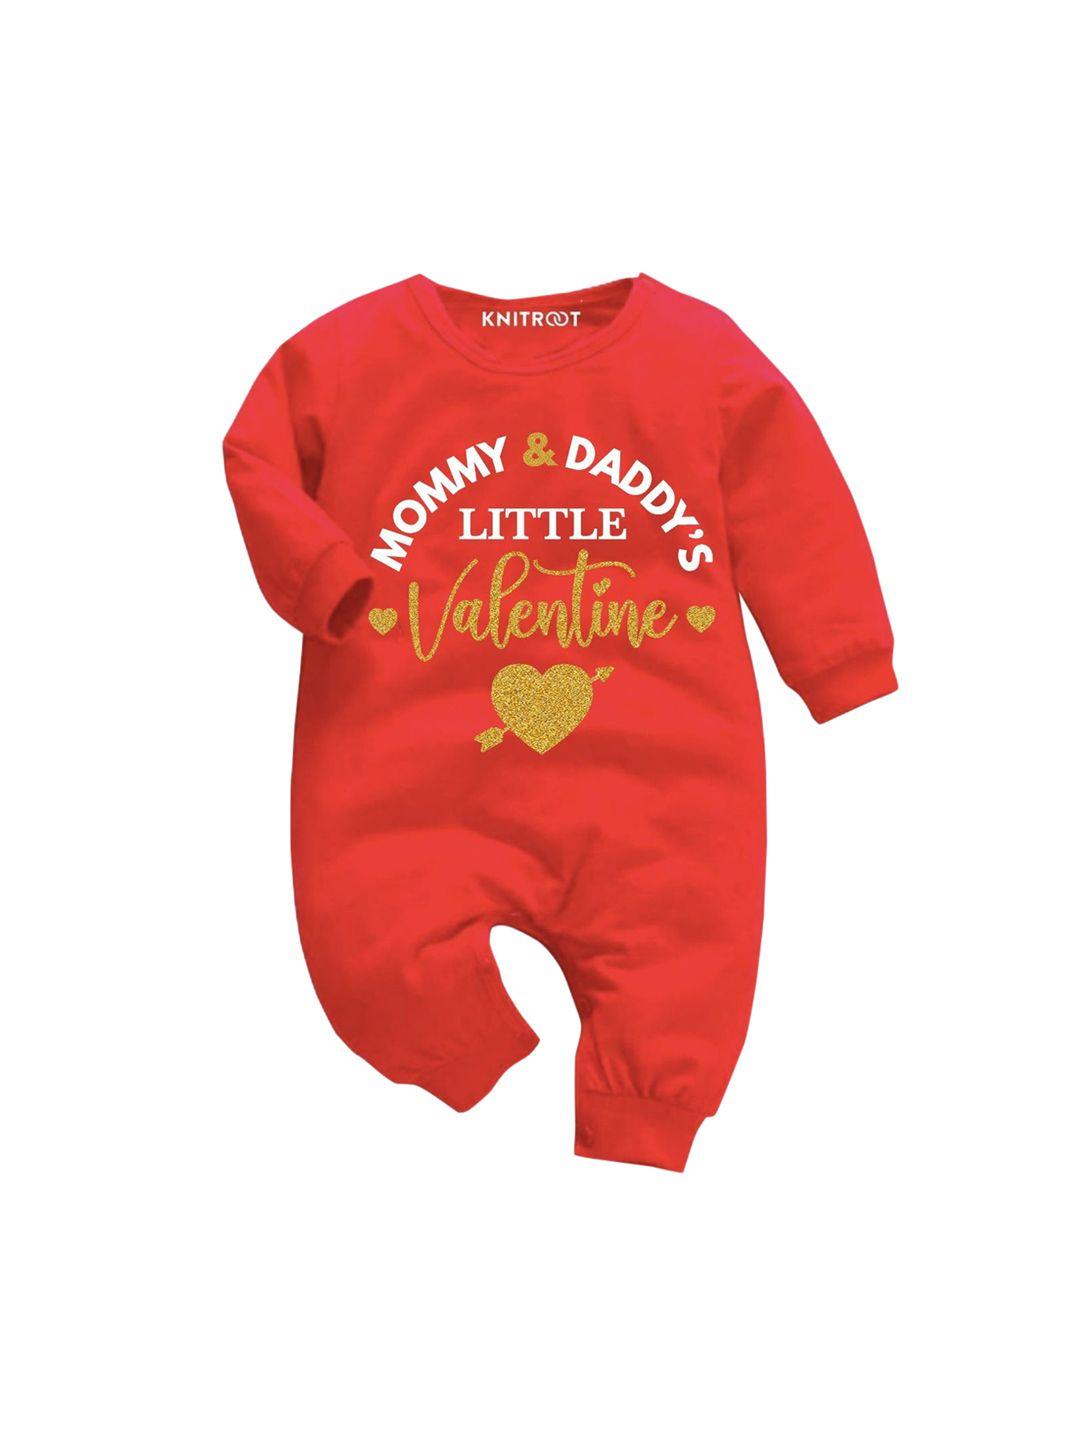 knitroot-infants-red-&-yellow-mommy-&-daddy-little-valentine-printed-cotton-rompers